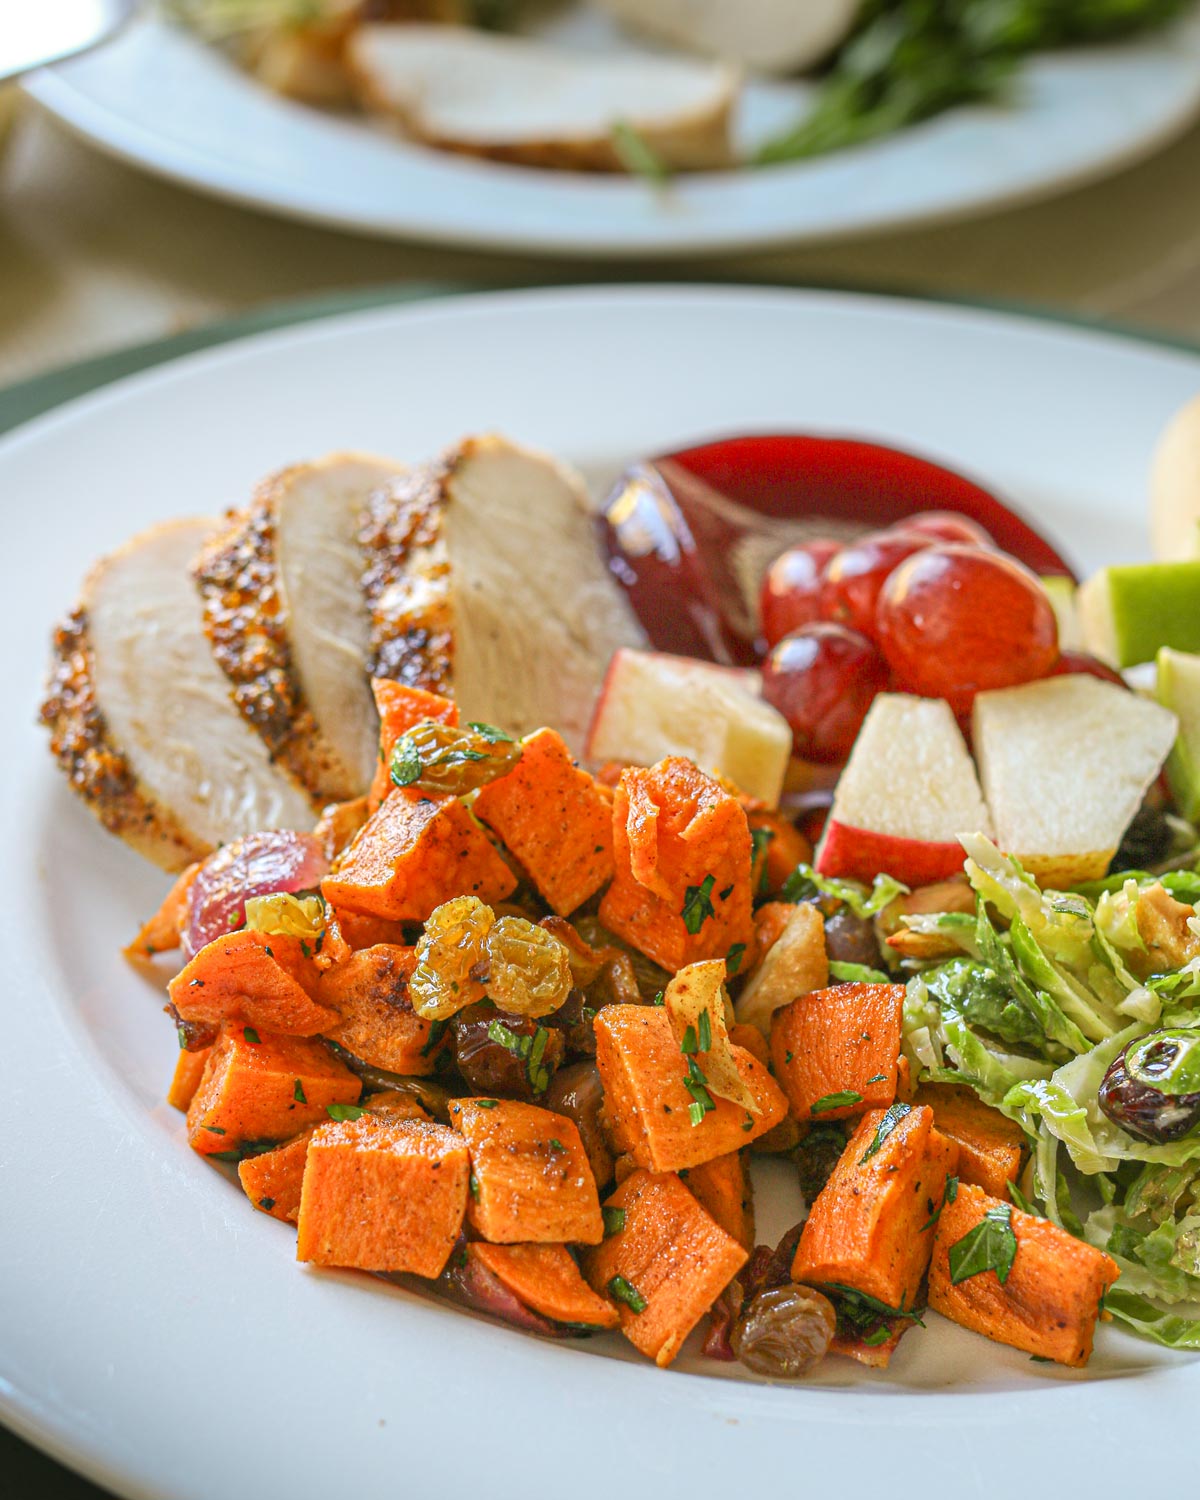 close up of sweet potato salad on dinner plate with turkey, cranberry sauce, and other sides.